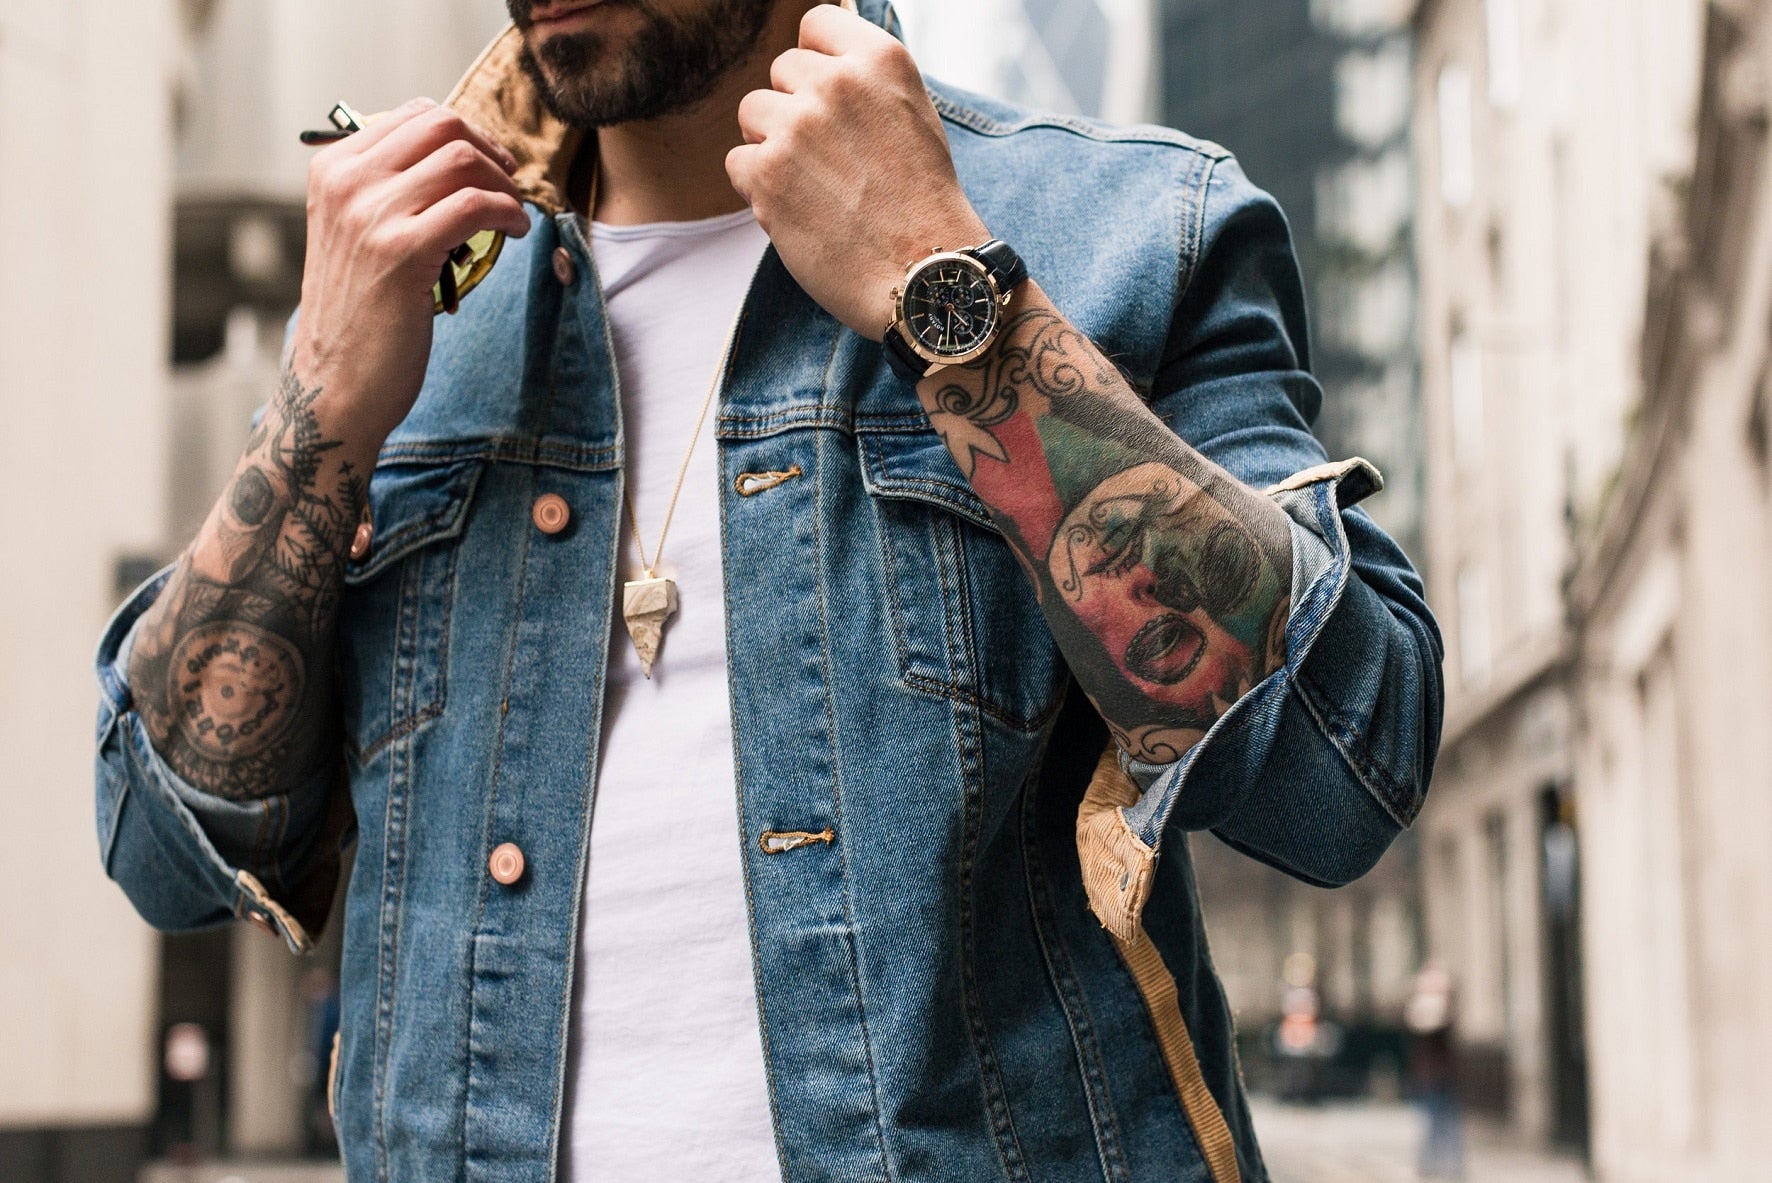 18 Accessories Every Man Should Own to Unlock Next-Level Style